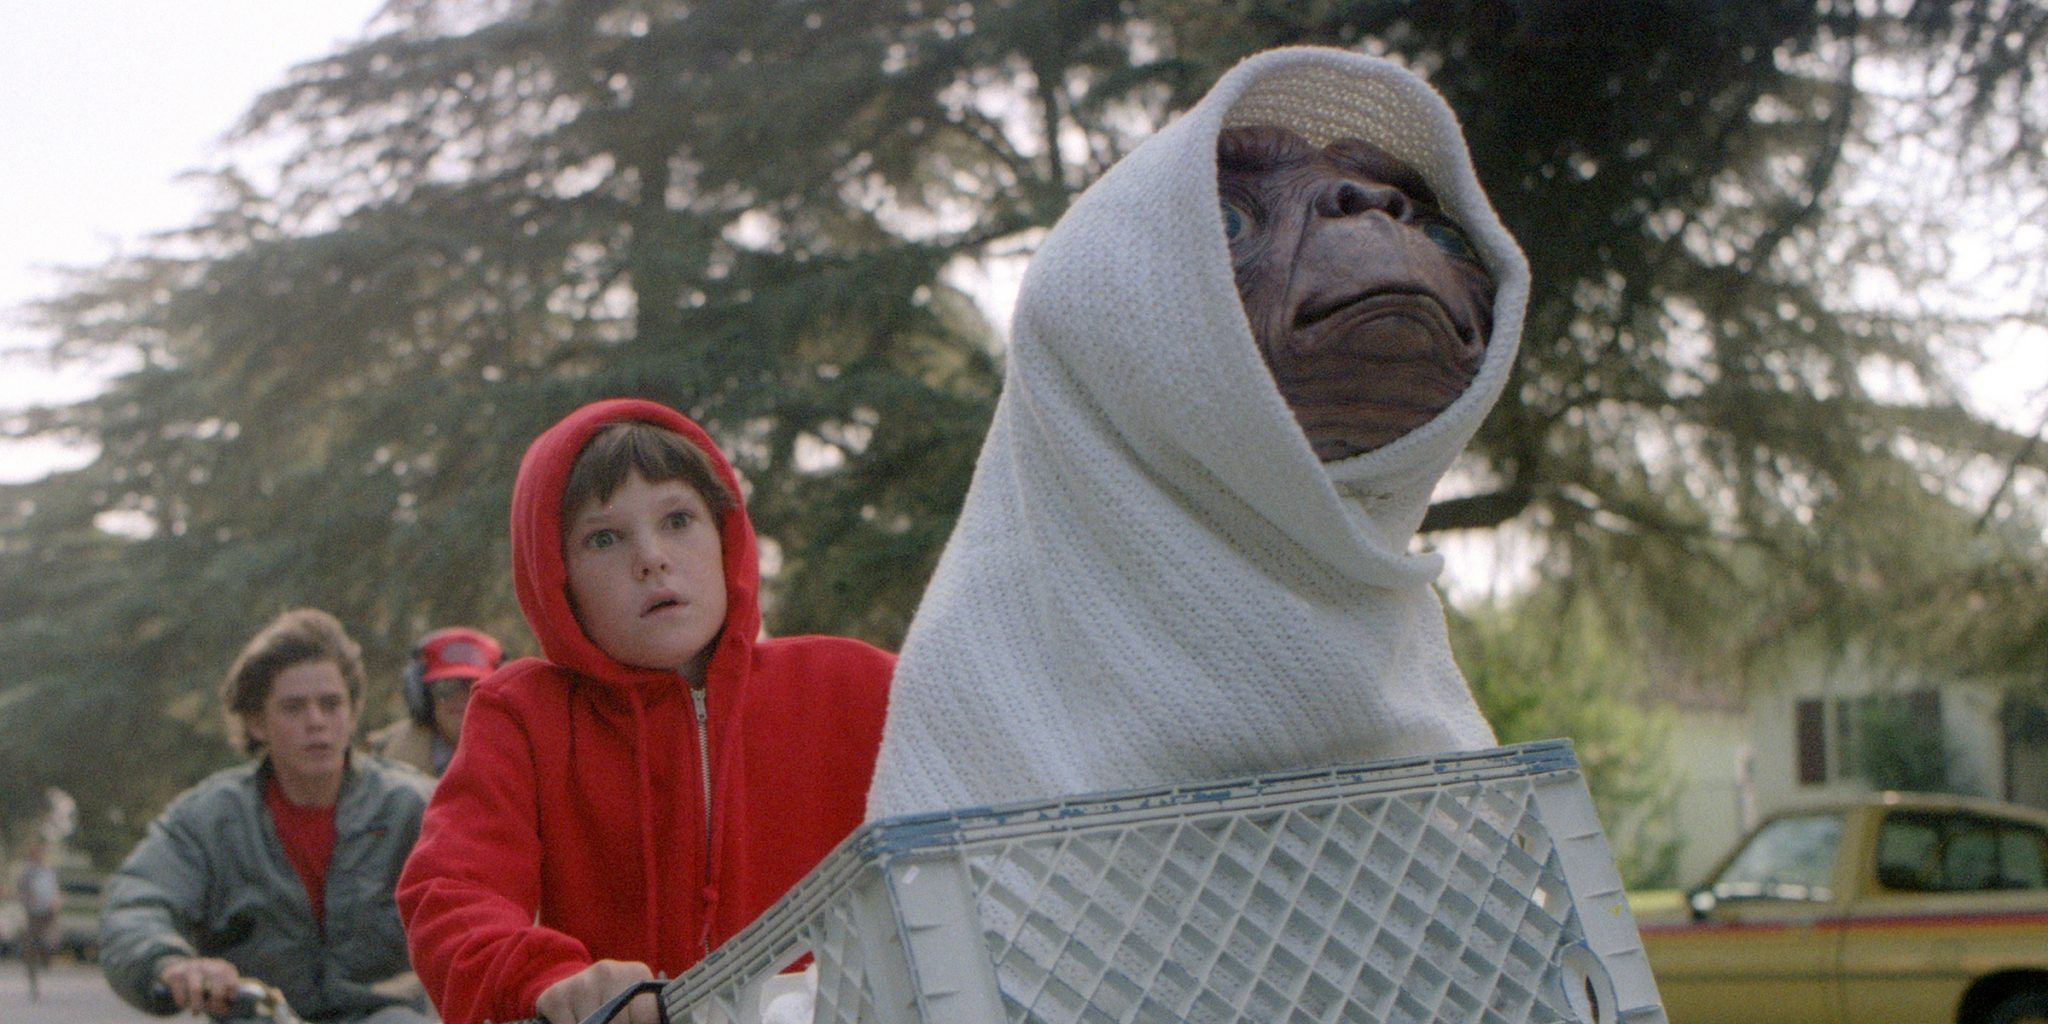 E.T. The Extra Terrestrial